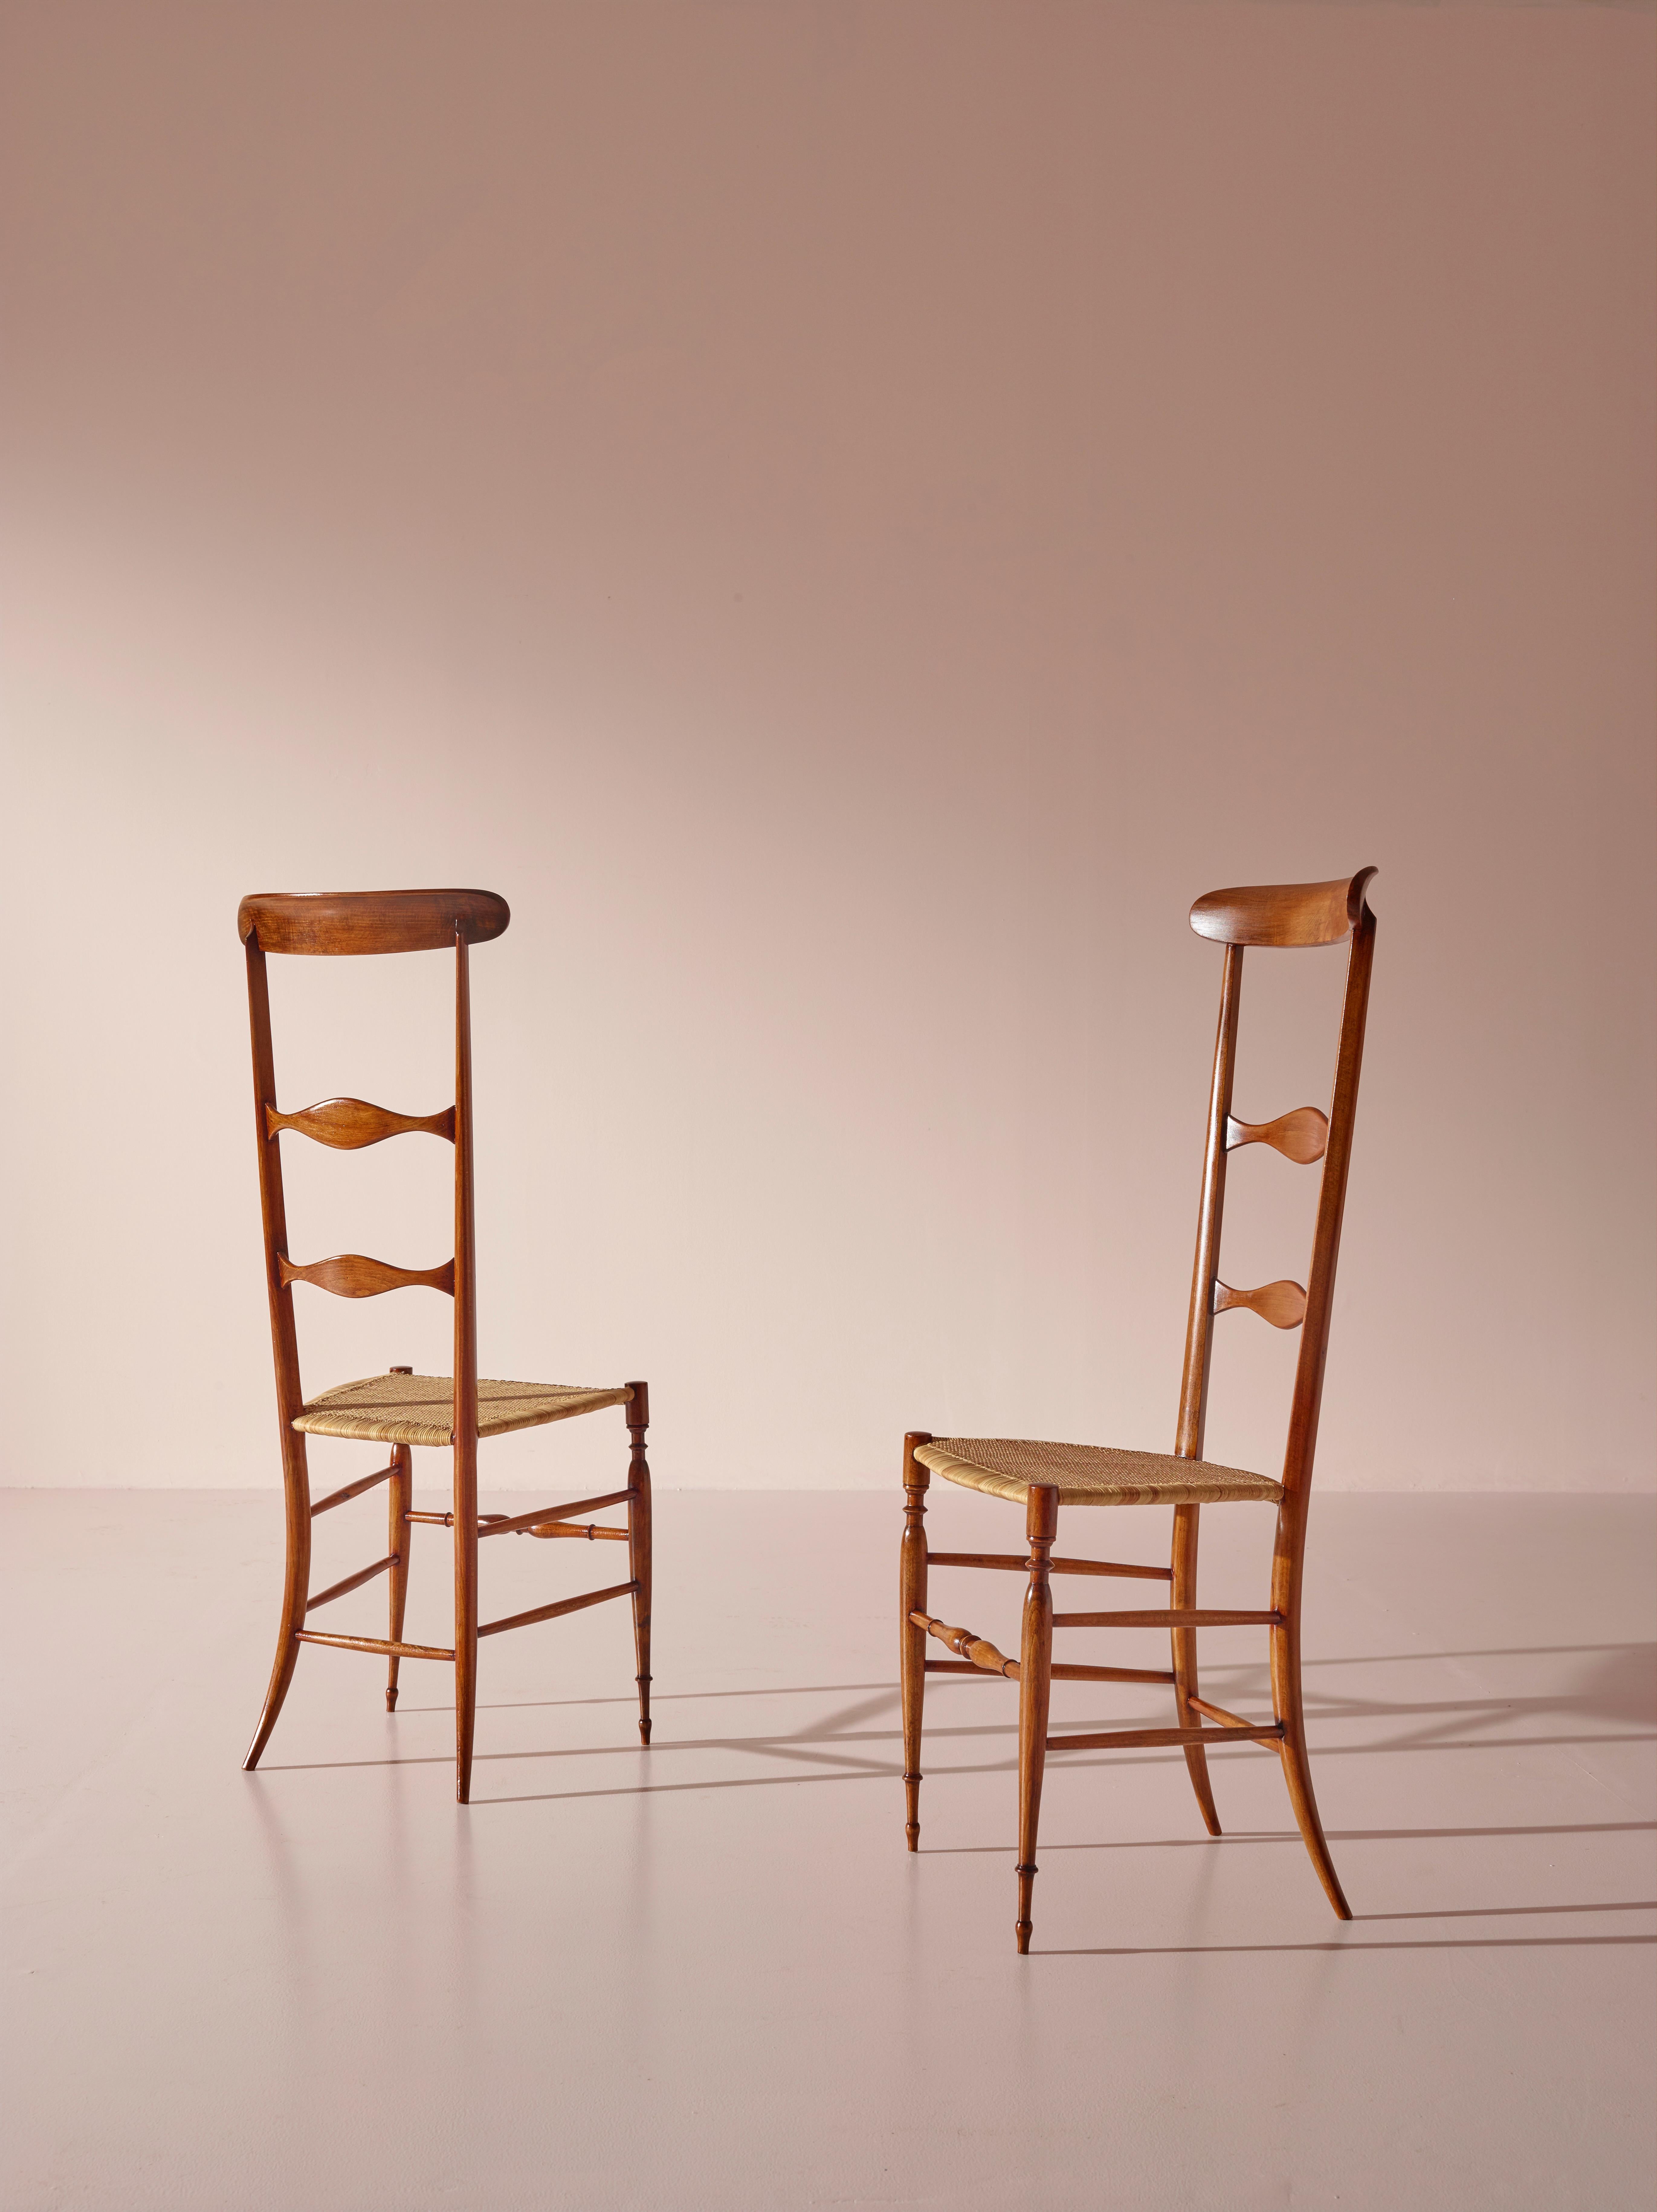 Pair of Campanino High Back Chairs Produced by Sabbadini, Chiavari, Italy, 1960s For Sale 5